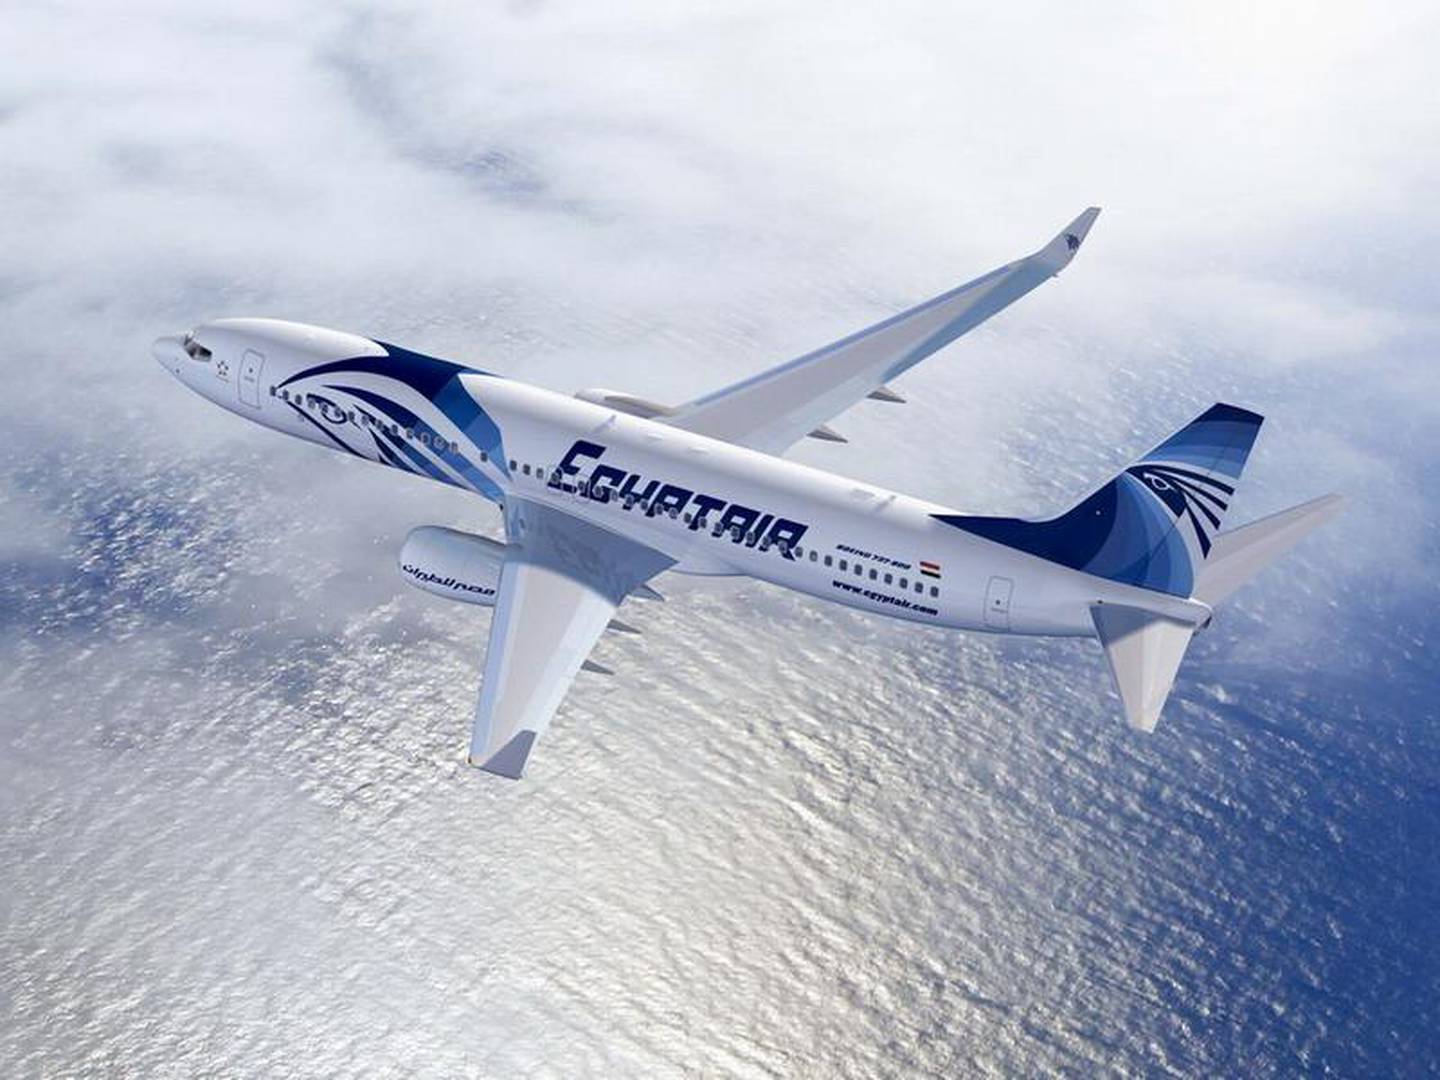 EgyptAir flies direct to London and Cairo International Airport is open to transit passengers.